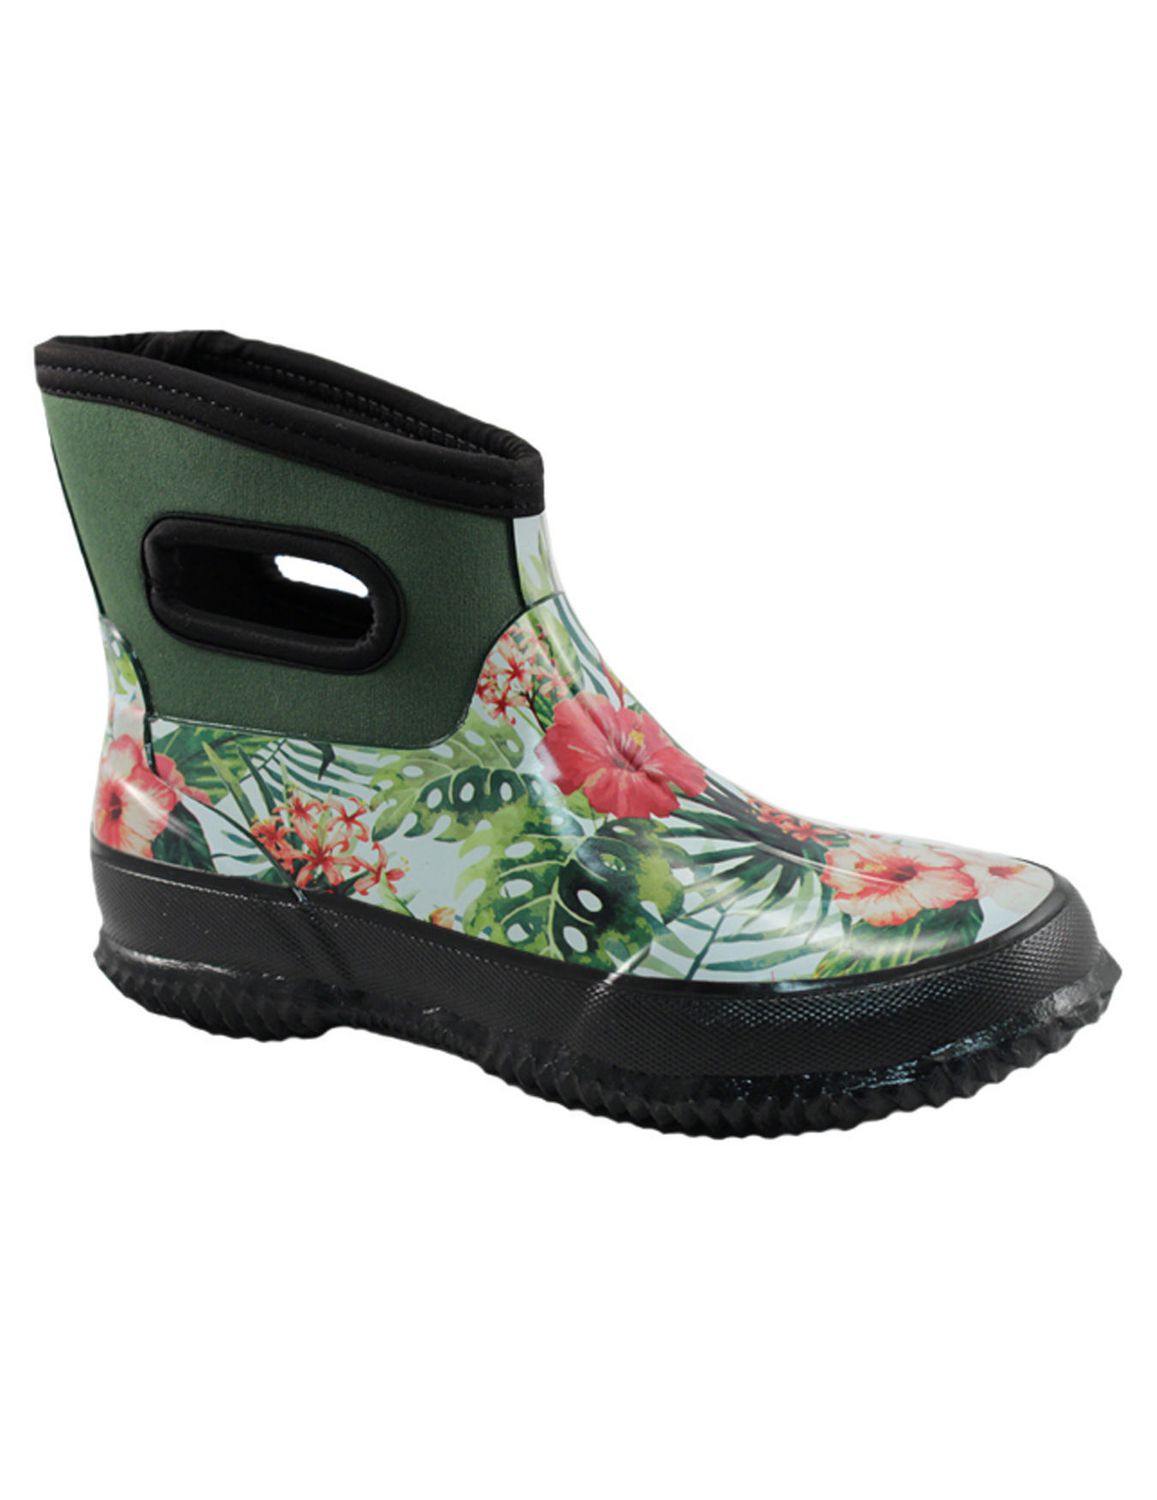 Adult Rubber Boots 7